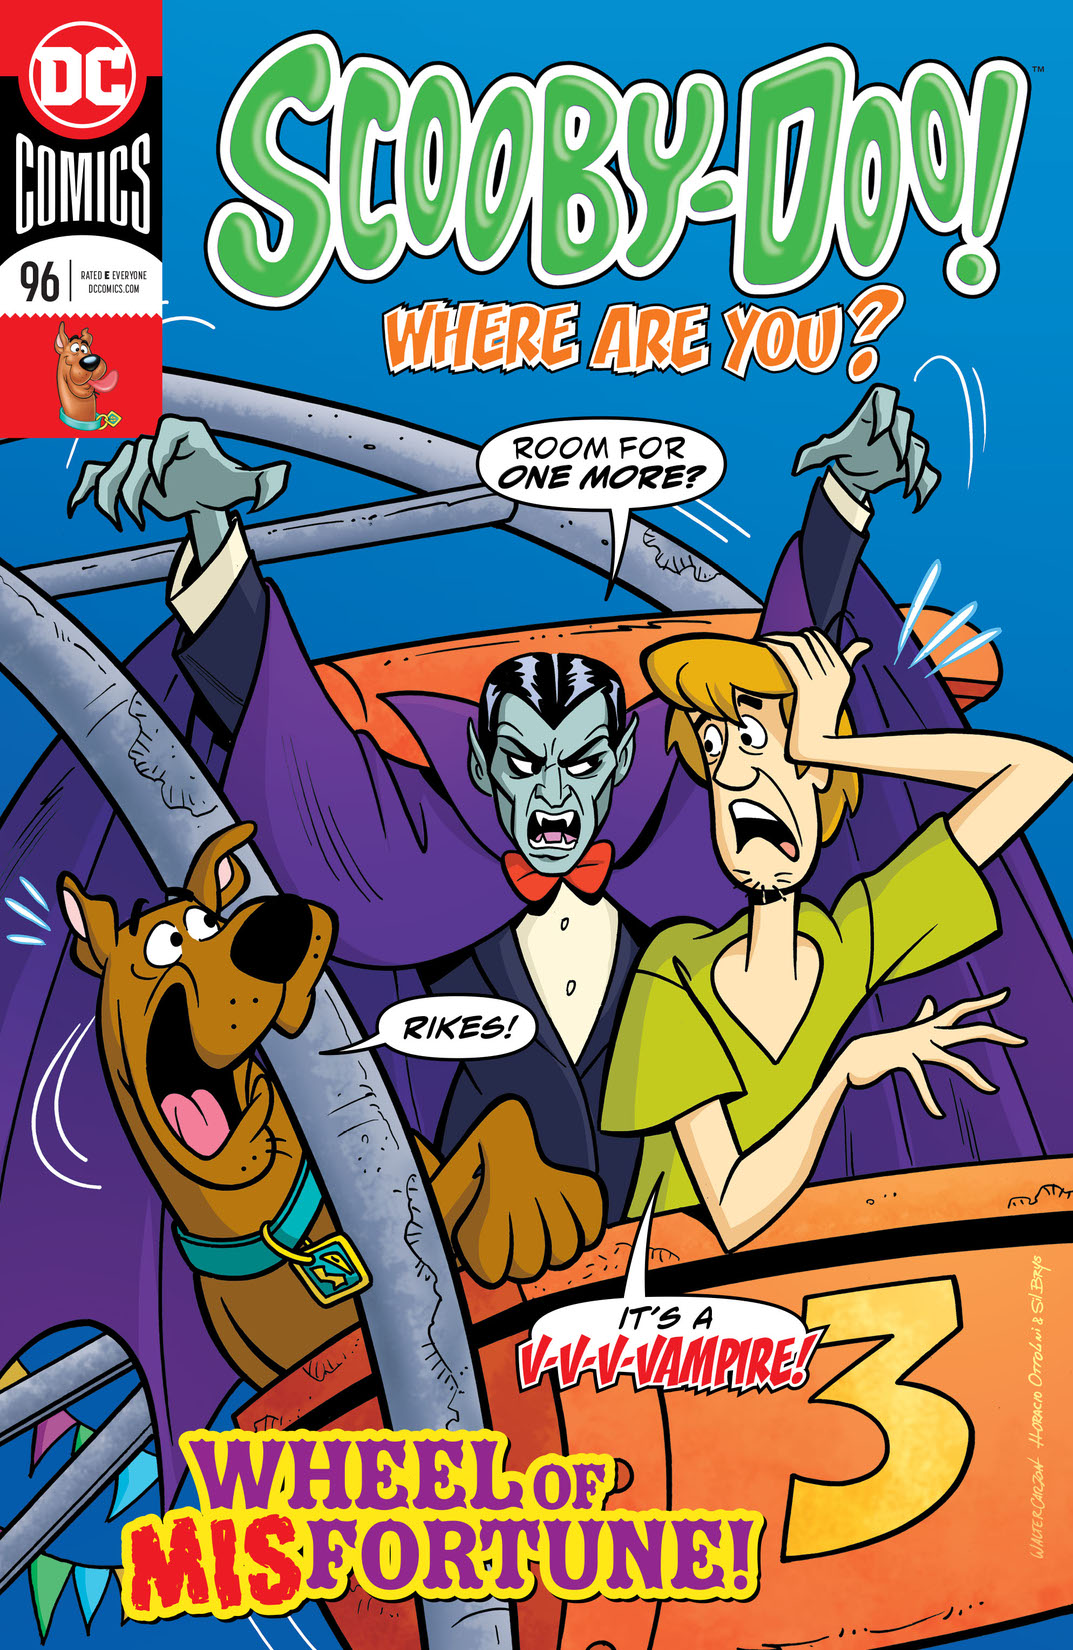 Scooby-Doo, Where Are You? #96 preview images